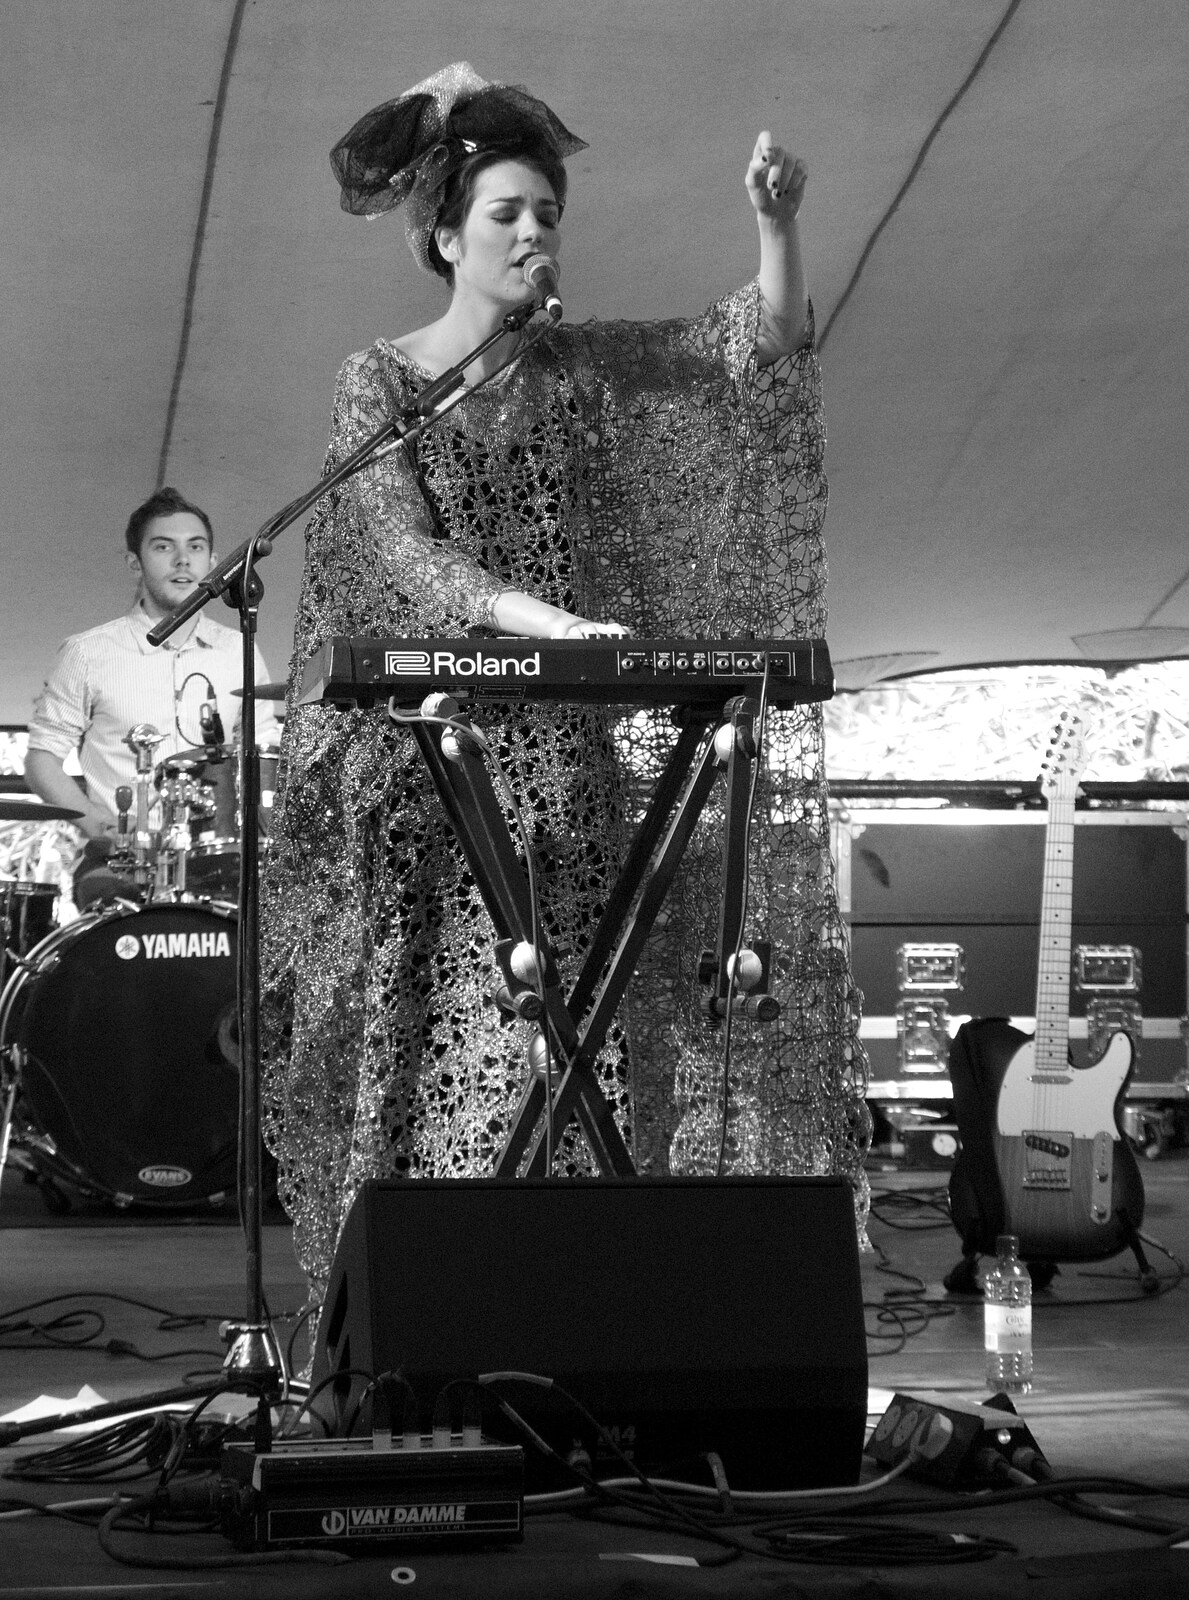 Daisy on keyboards from The 8th Latitude Festival, Henham Park, Southwold, Suffolk - 18th July 2013